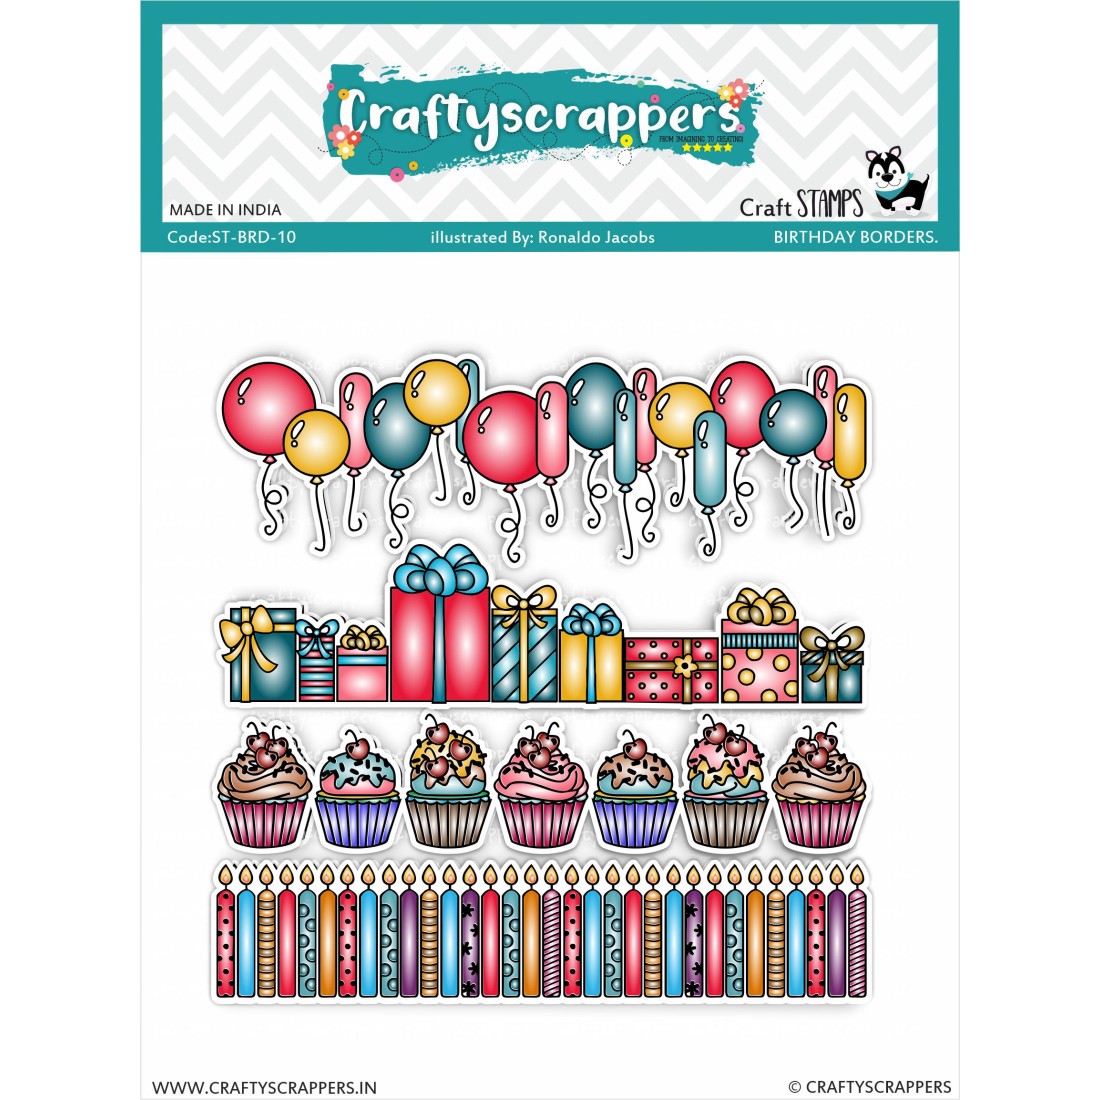 Craftyscrappers Stamps- BIRTHDAY BORDERS